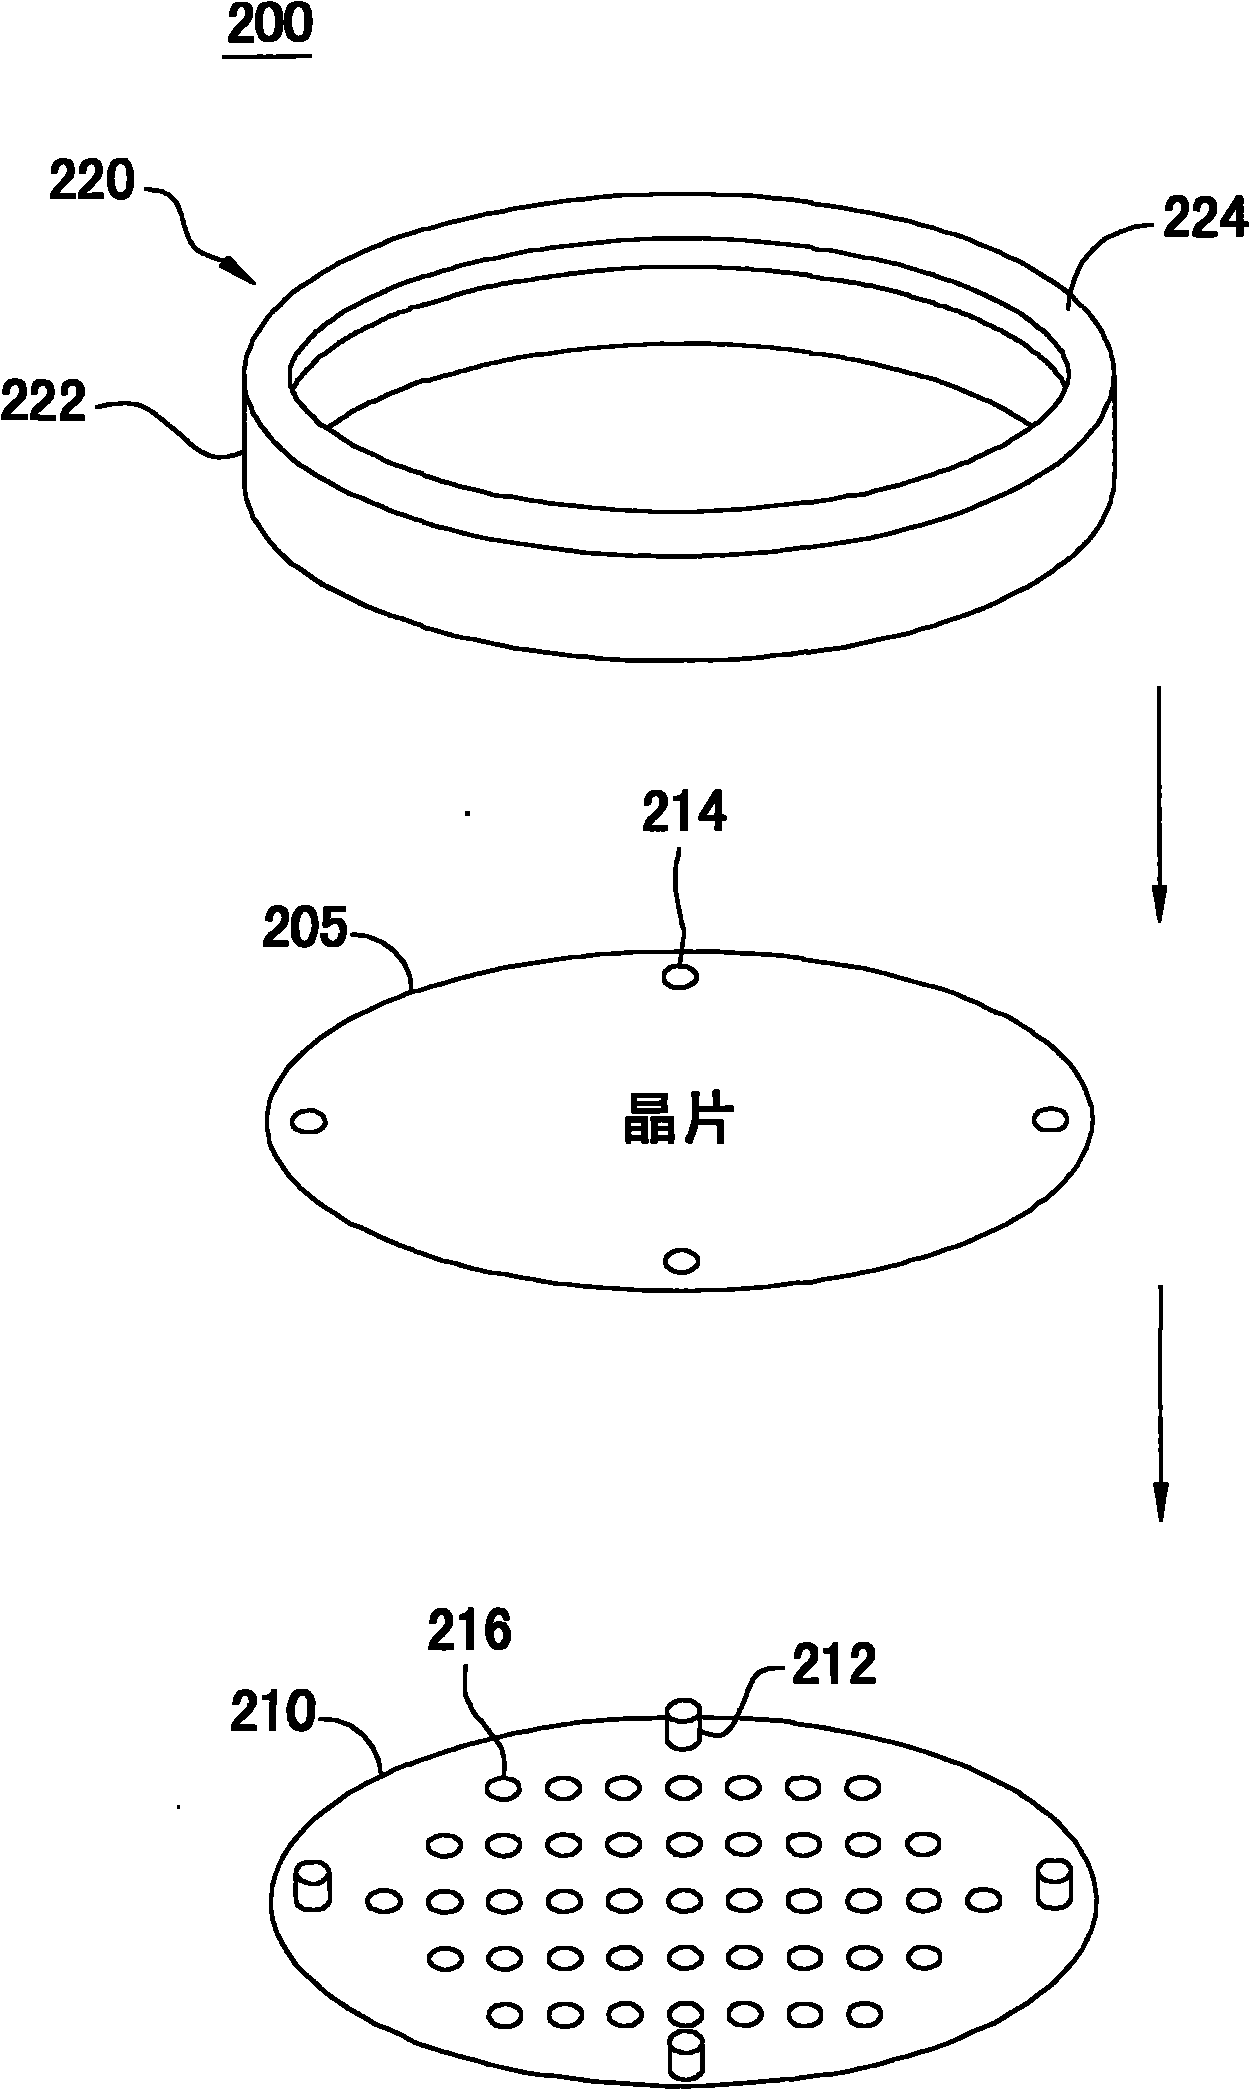 Wafer holding mechanism, wafer holding system and wafer matched with wafer carrier